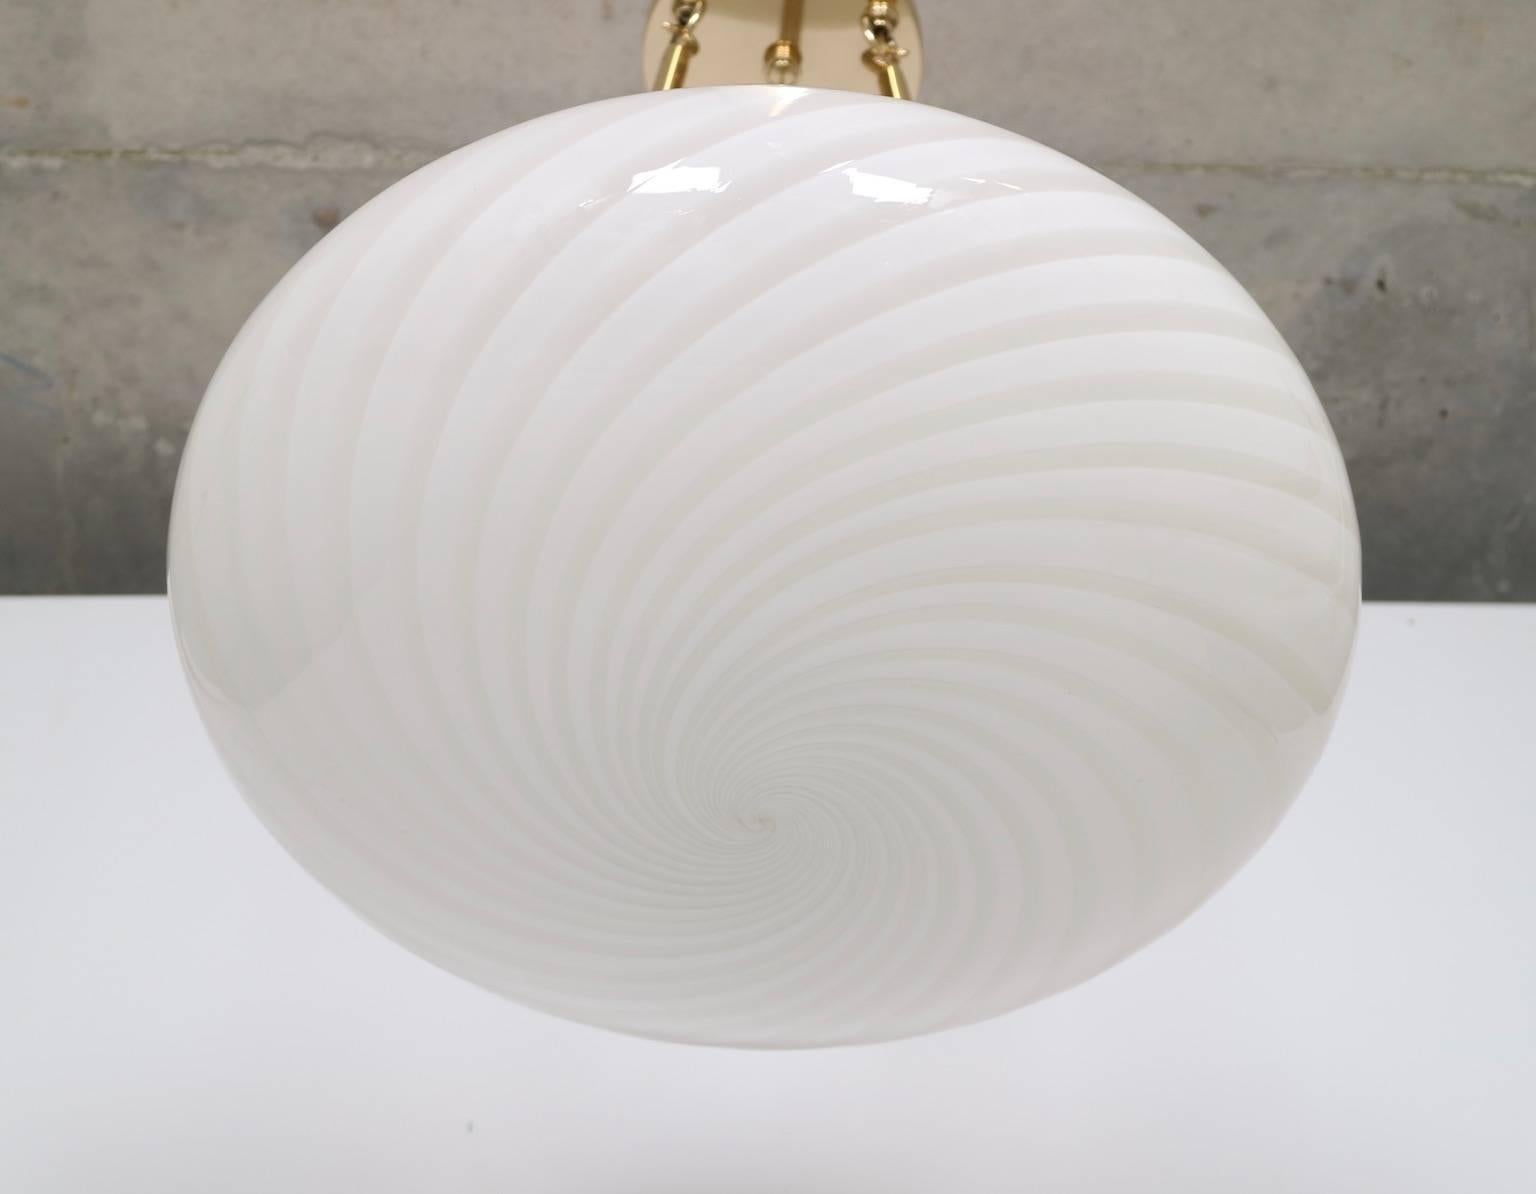 Large midcentury Murano glass pendant by Venini with signature swirl glass technique. The pendant hangs by three brass arms and takes three regular light bulbs. This pendant has been fully restored with new sockets and wiring. 

This piece is in